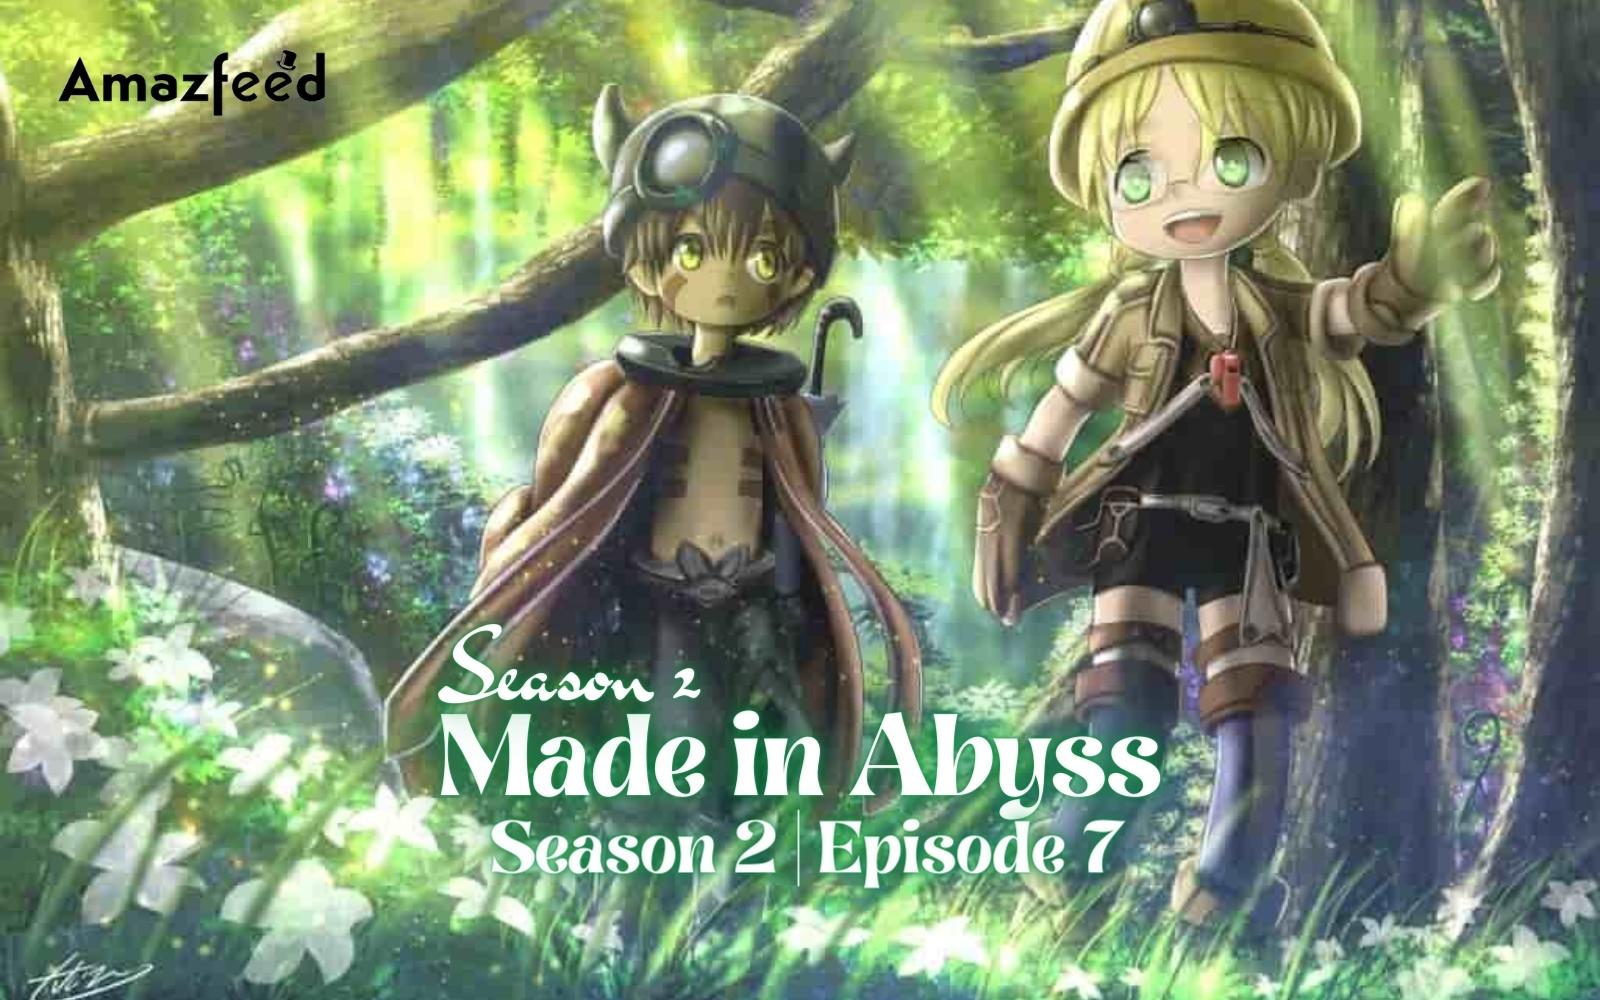 Made in Abyss Season 2 Episode 7 : Where to Watch, Countdown, Release Date, Recap, Cast & Spoiler